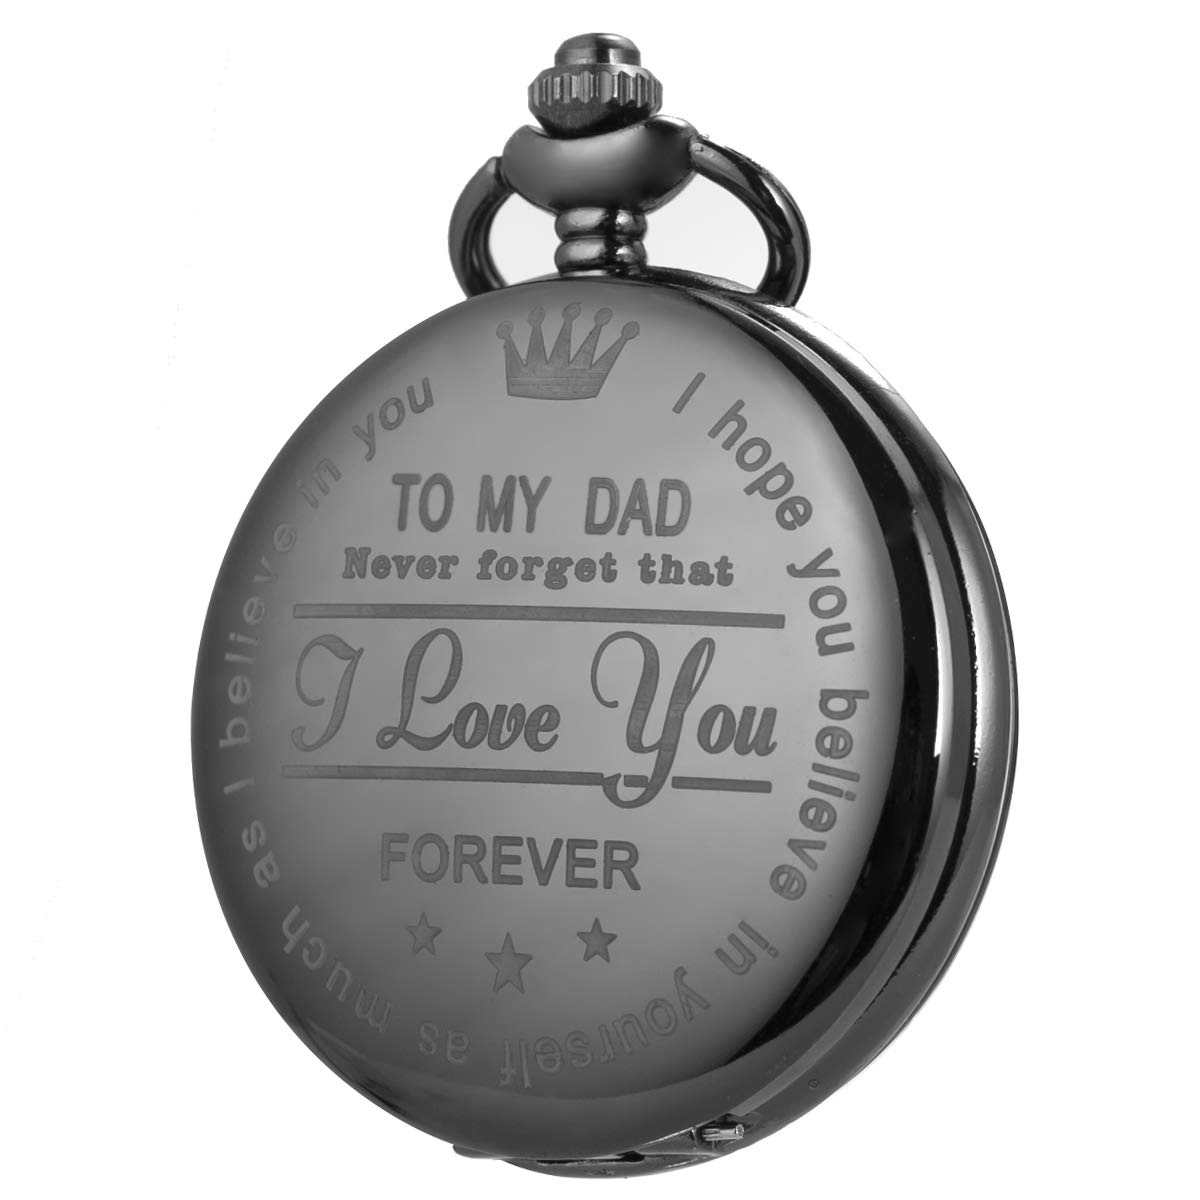 SIBOSUN Pocket Watch Men Engraved Black Chain Quartz Gifts for Dad from Son Daughter DAD Personalized Gifts Luxury PU Leather Pocket Watch Box Display Case Storage Case Black